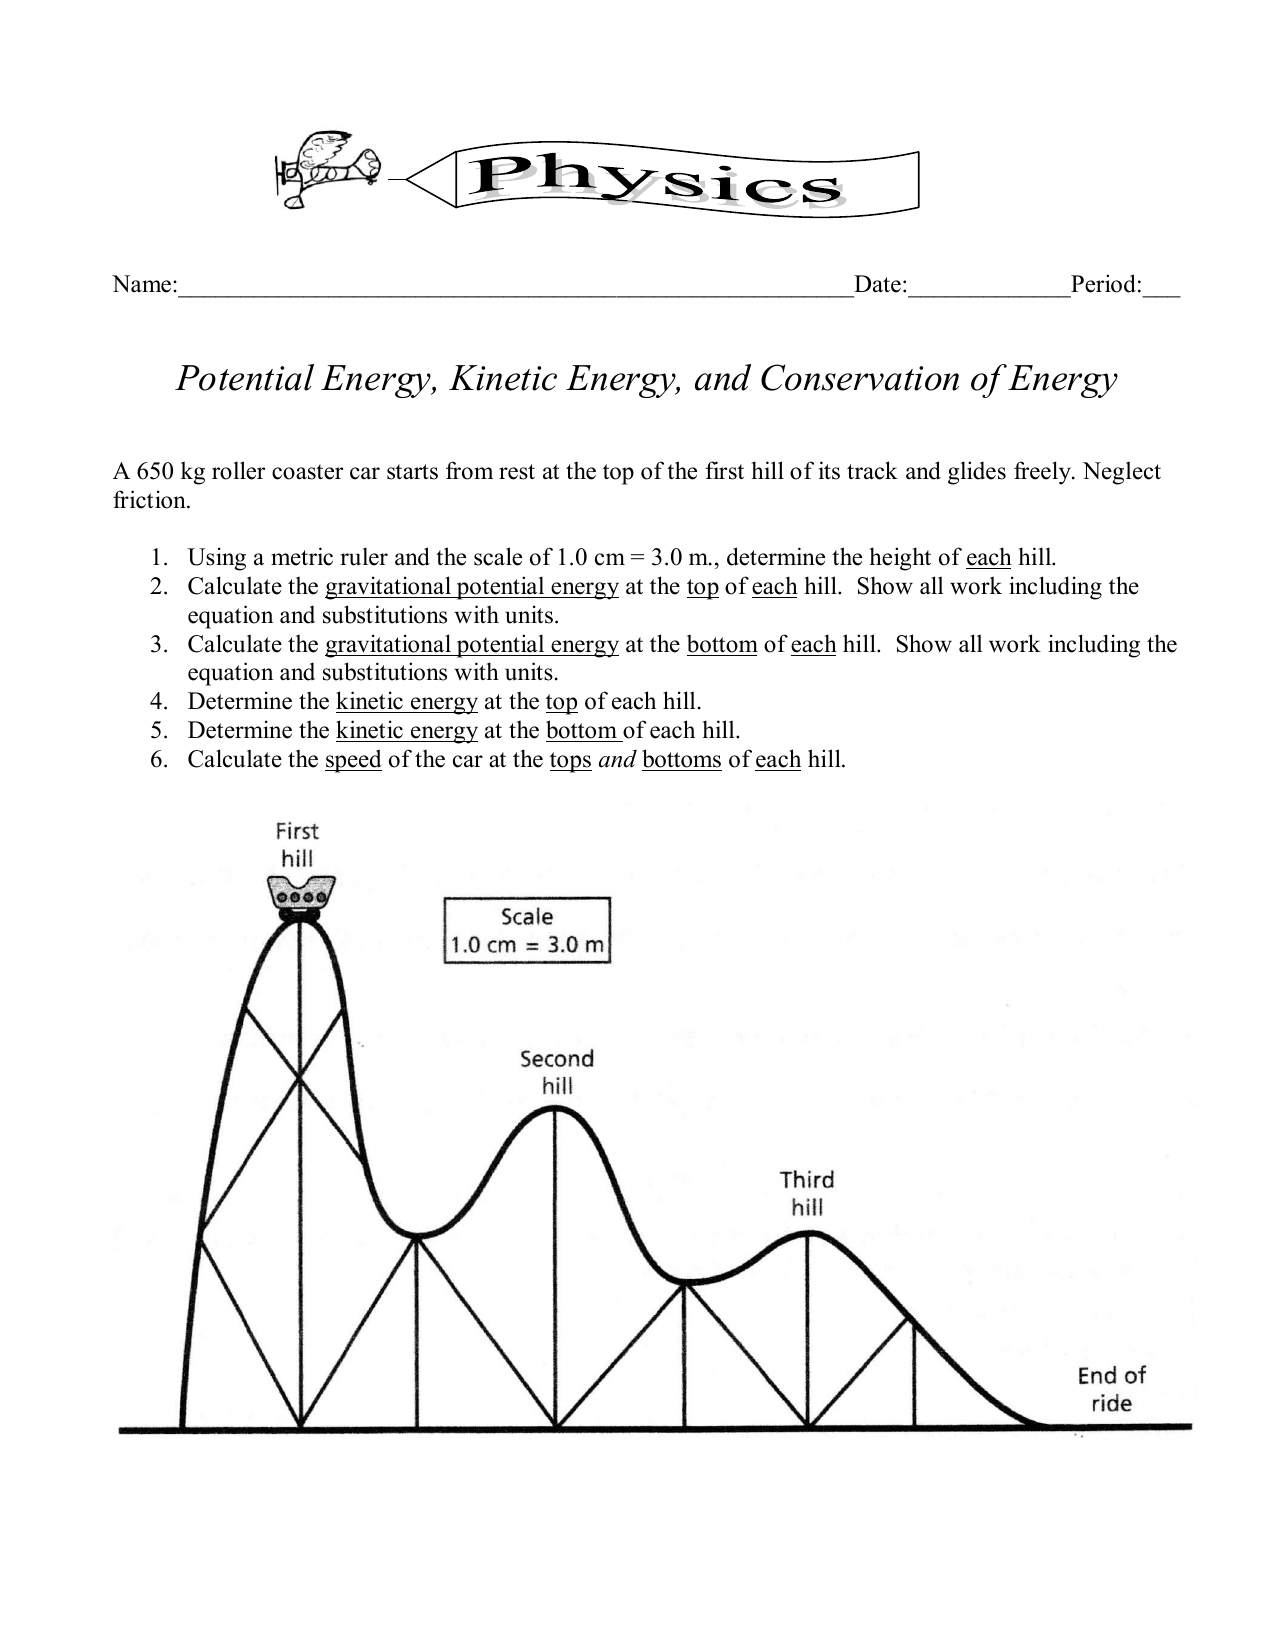 potential-and-kinetic-energy-roller-coaster-worksheet-db-excel